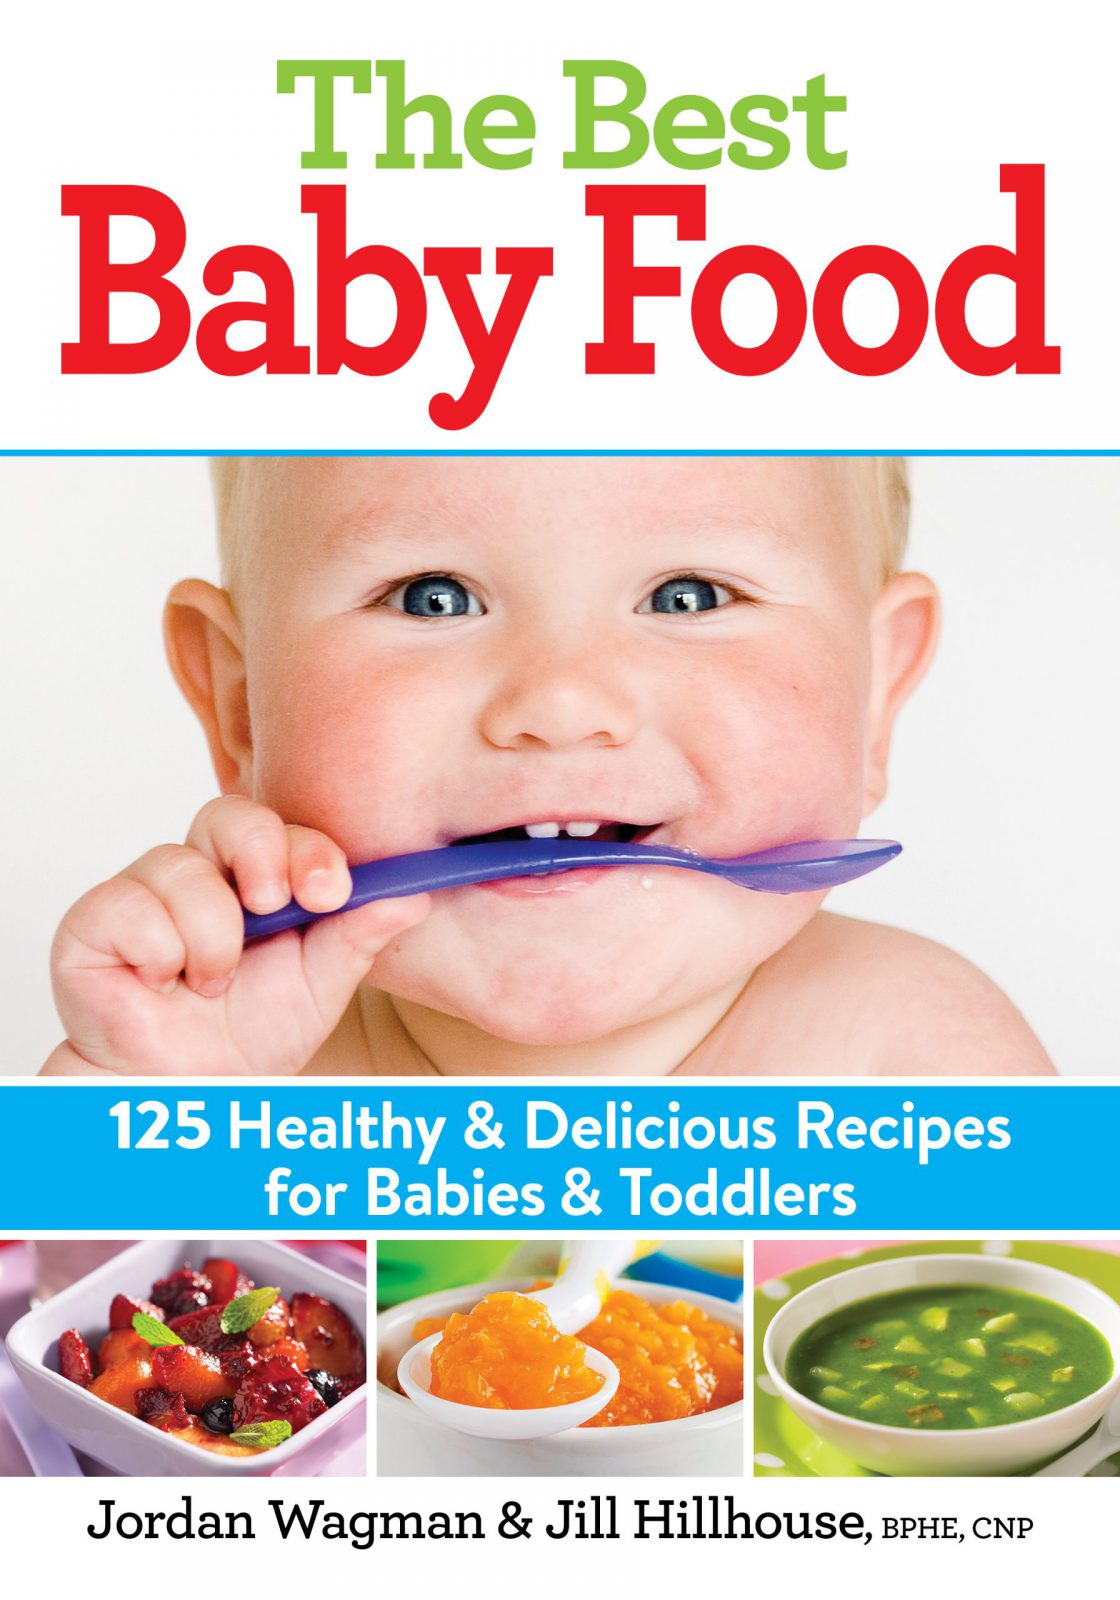 The Best Baby Food